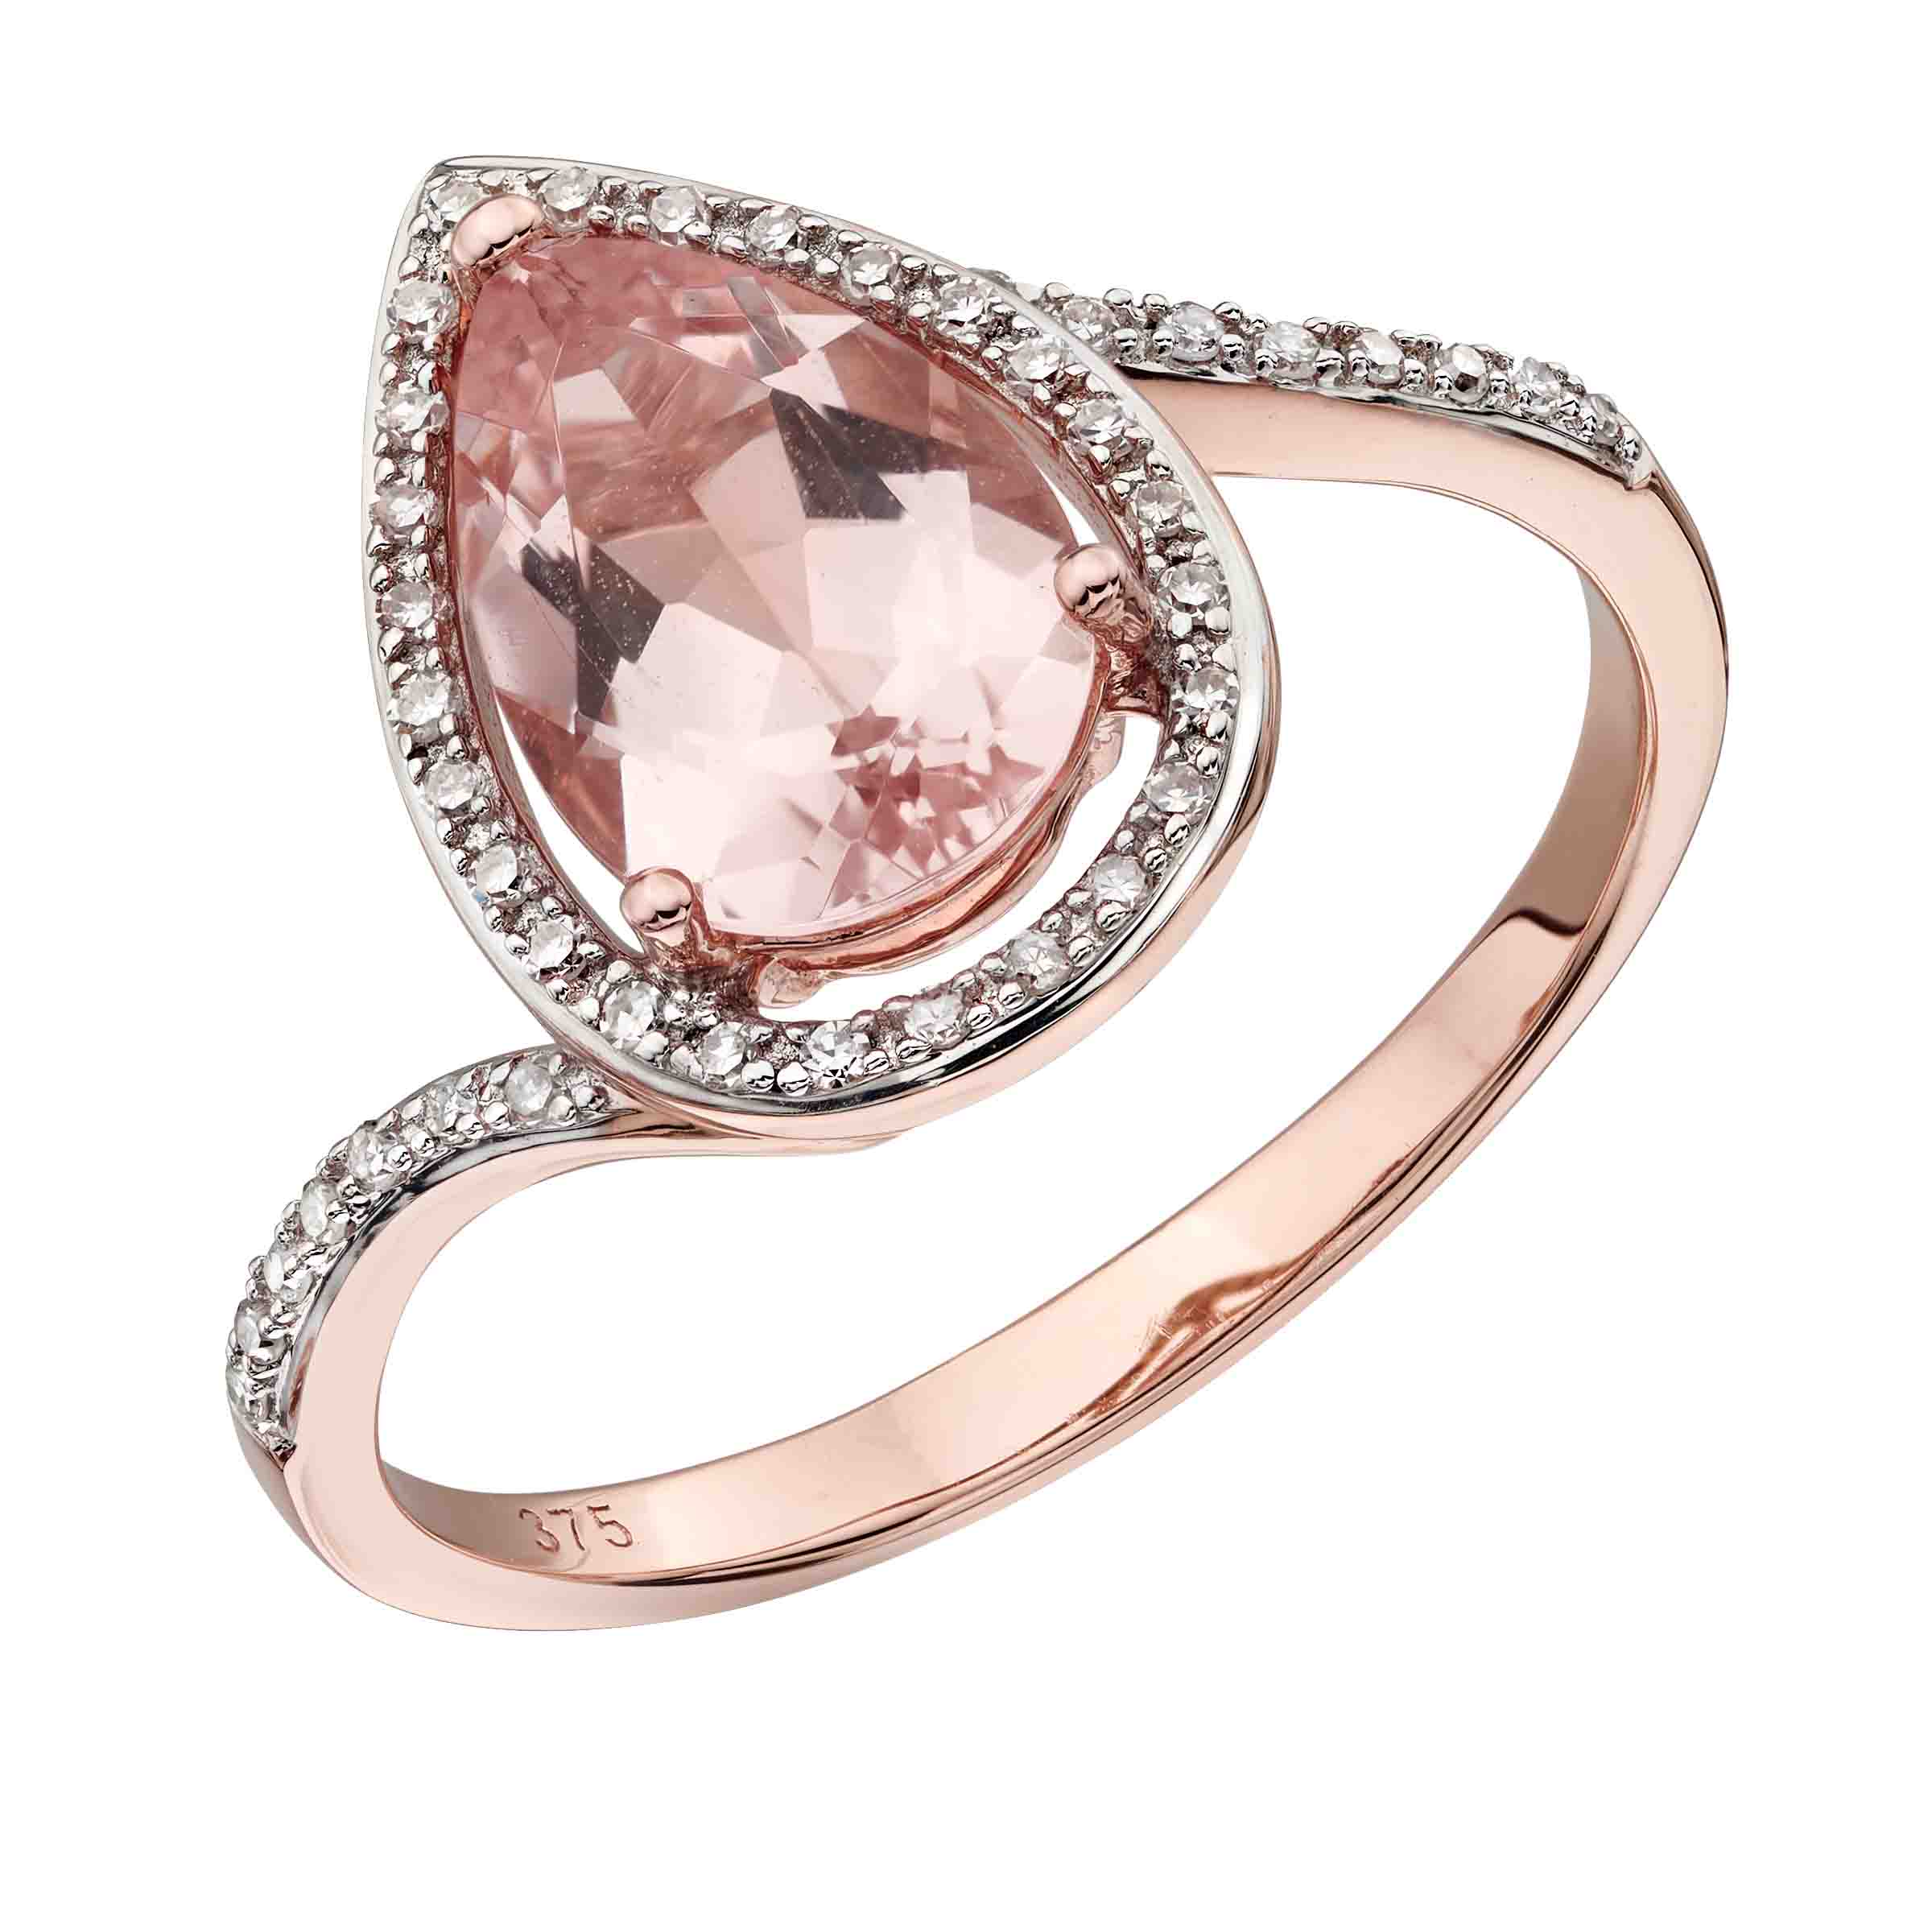 9ct rose gold pear shaped morganite & diamond cluster ring on Sally Thorntons jewellery blog from AA Thornton Kettering Northampton 